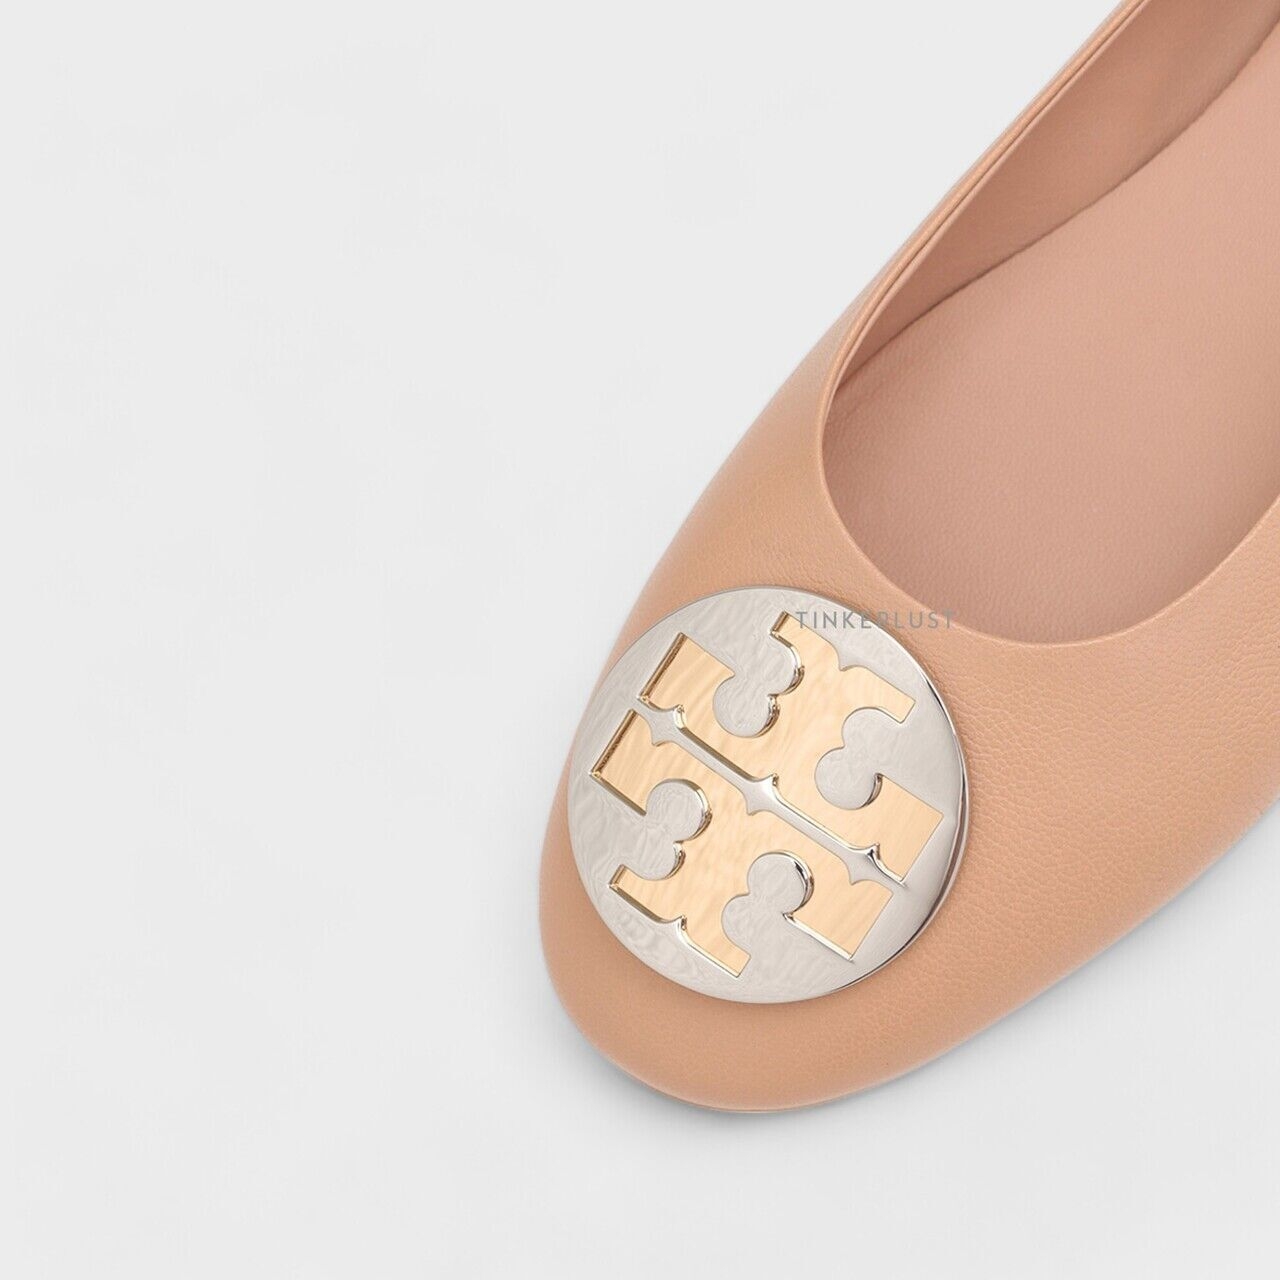 Tory Burch Claire Ballerina in Light Sand Flats